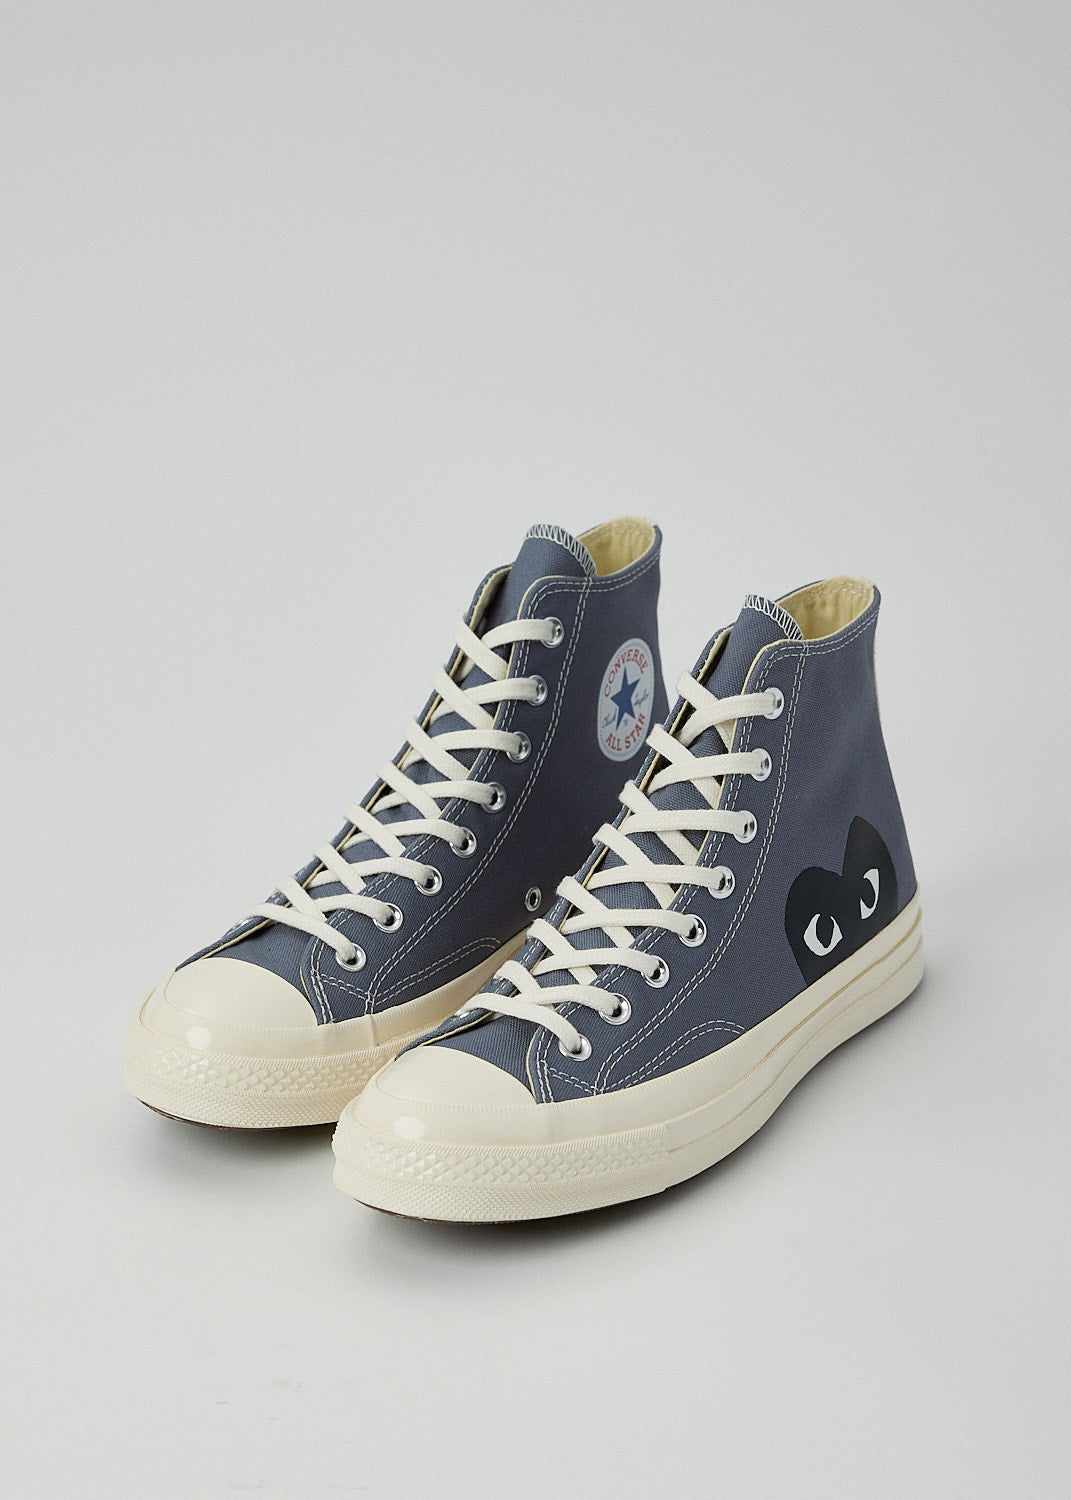 Comme des Garçons PLAY - Grey CDG Chuck 70 High Sneakers | 1032 SPACE 1032 Space